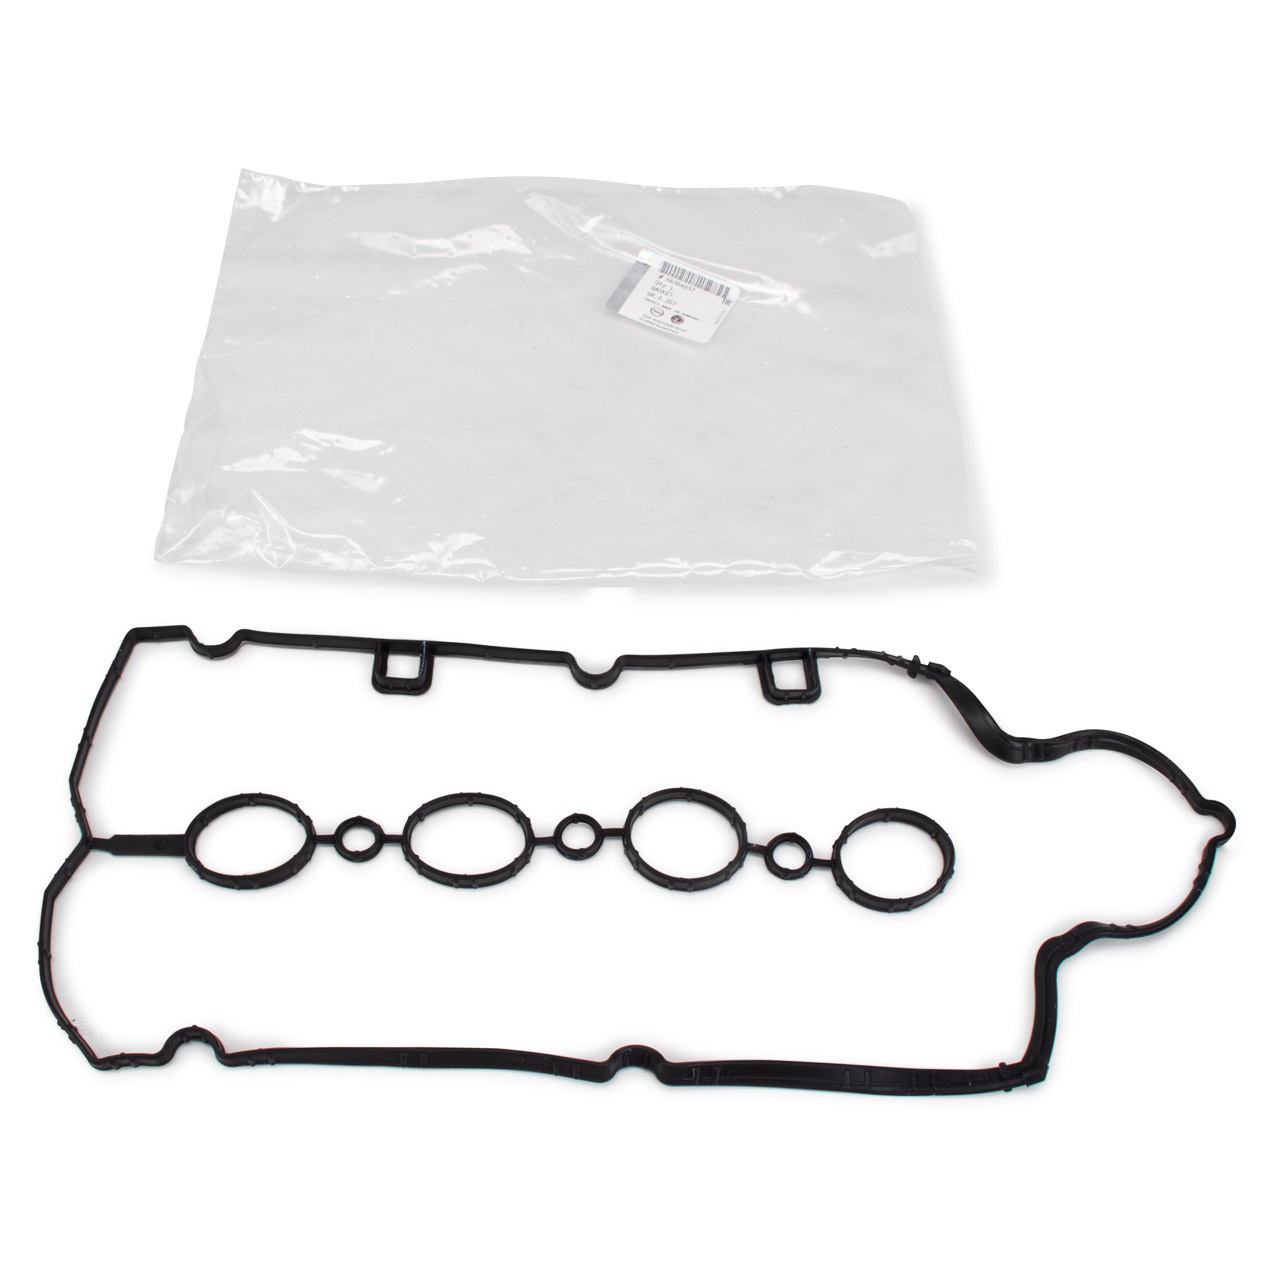 Original valve cover seals for your vehicle